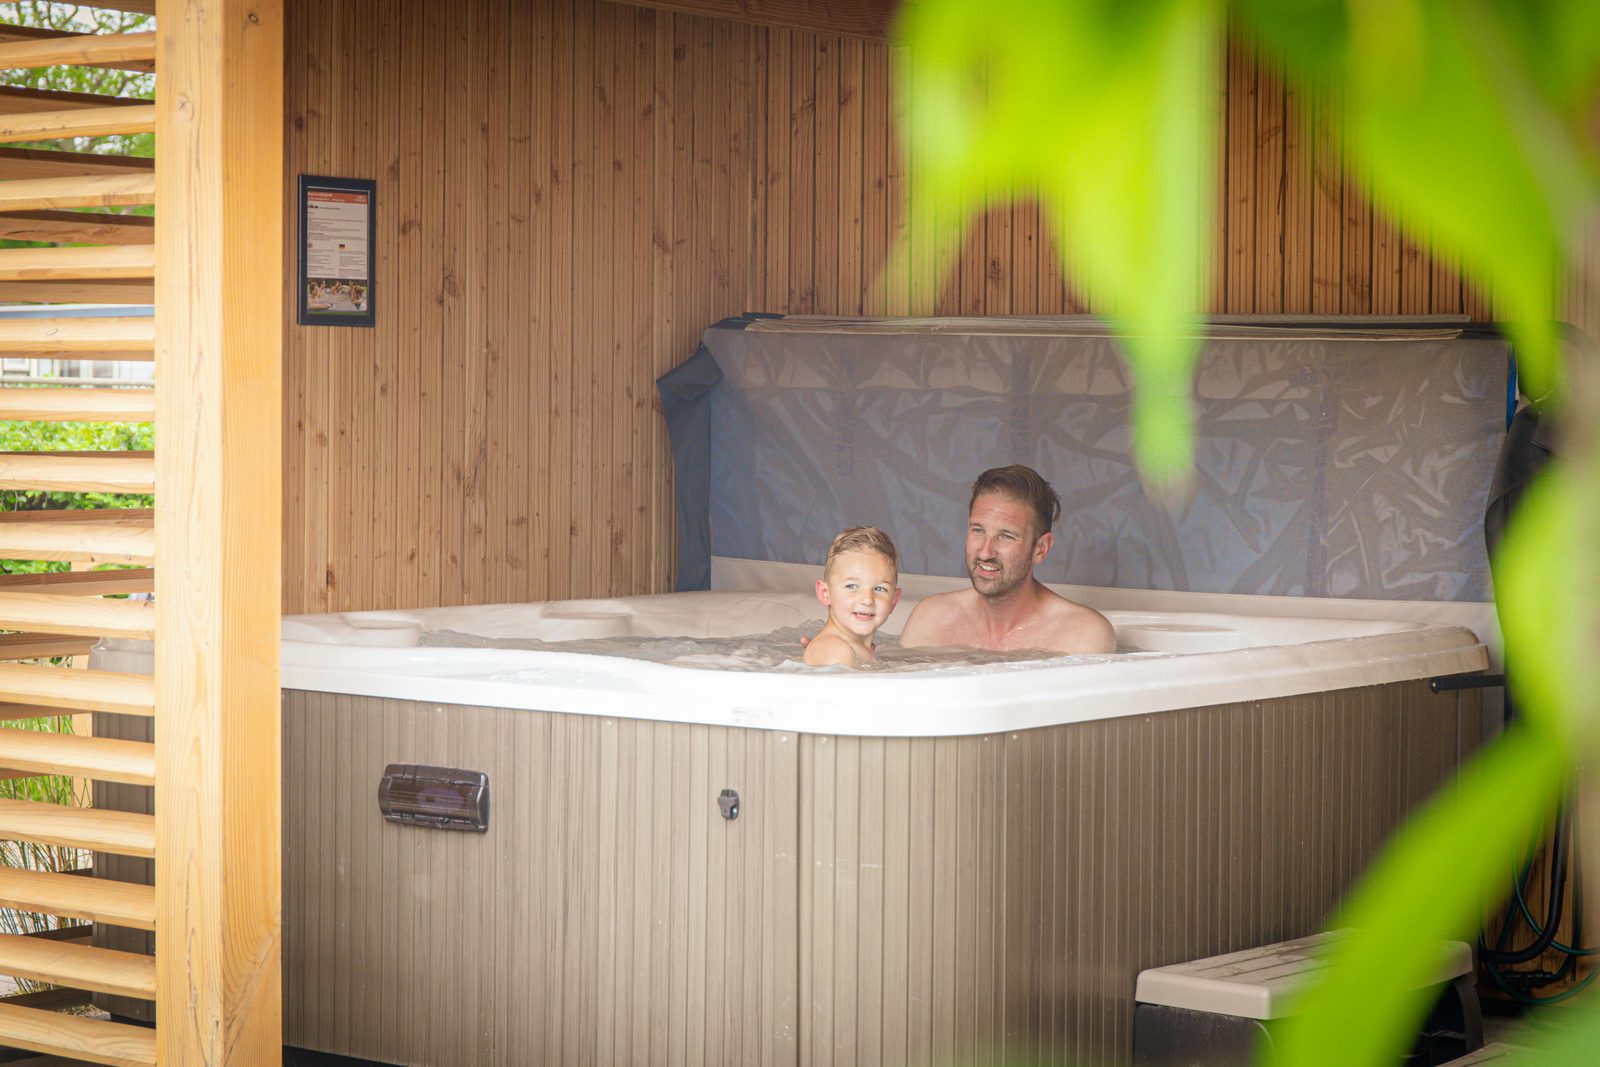 Find out more about our homes with sauna and jacuzzi